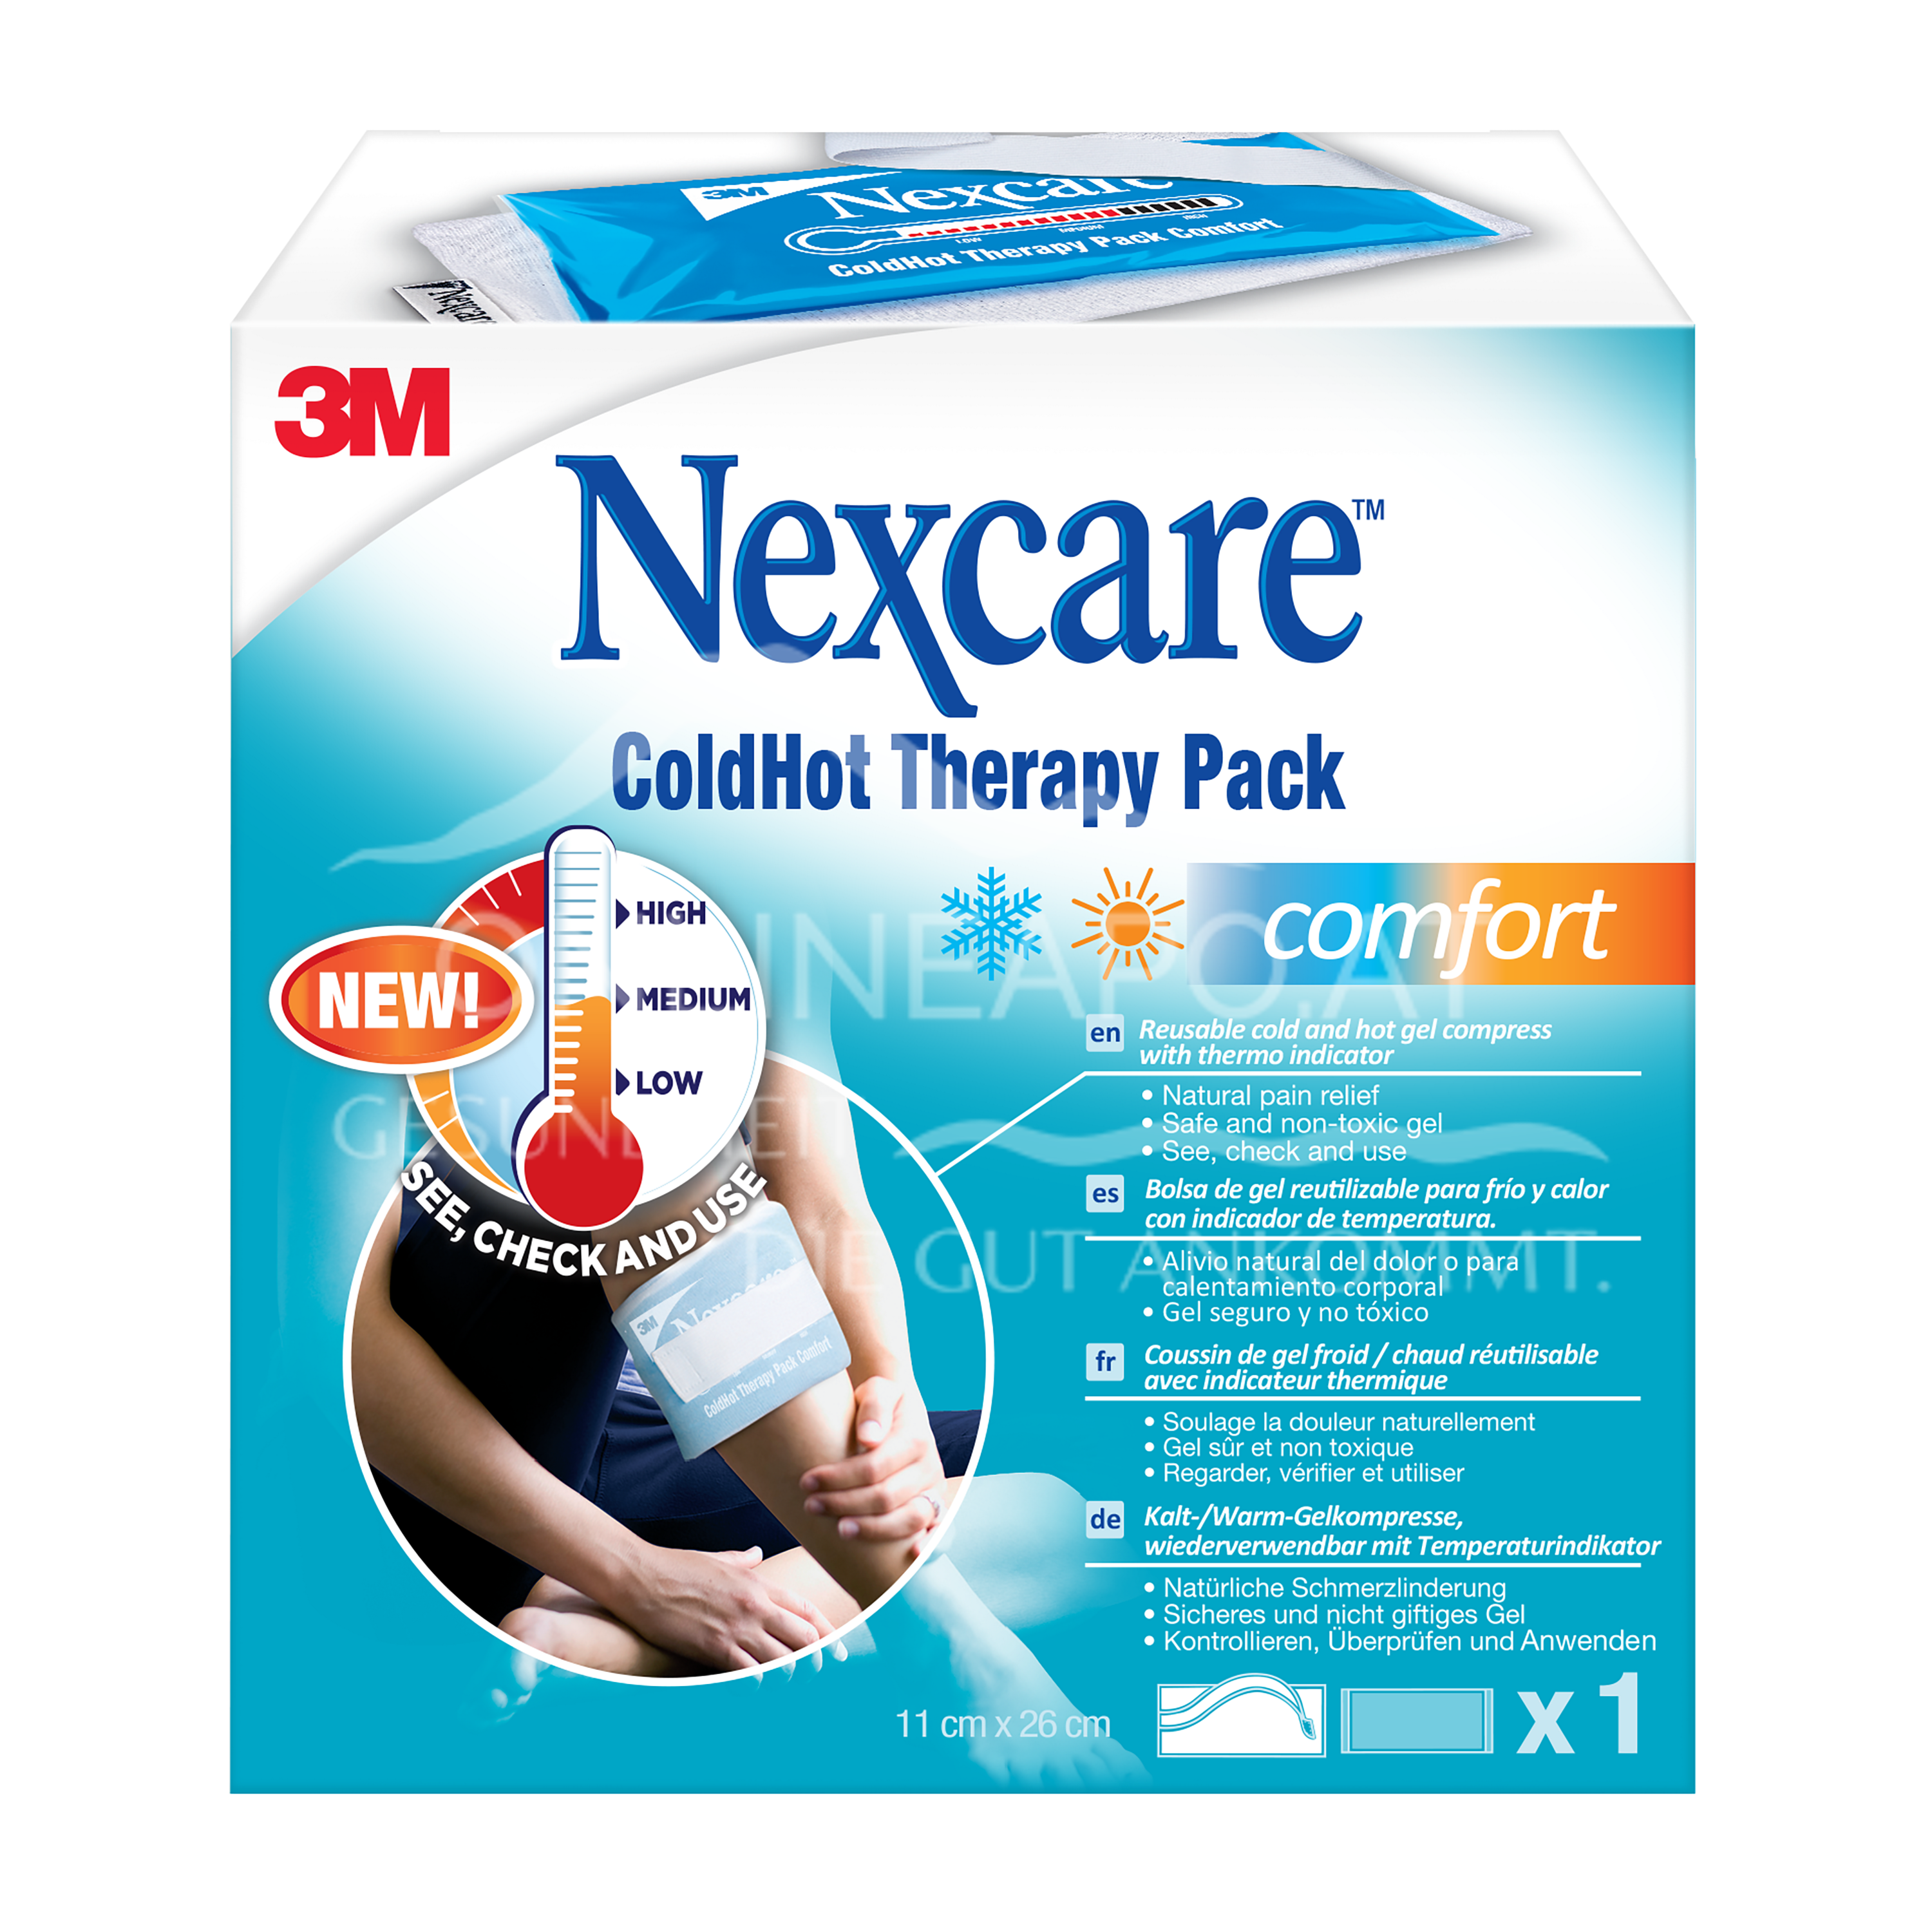 3M Nexcare™ ColdHot Therapy Pack Comfort